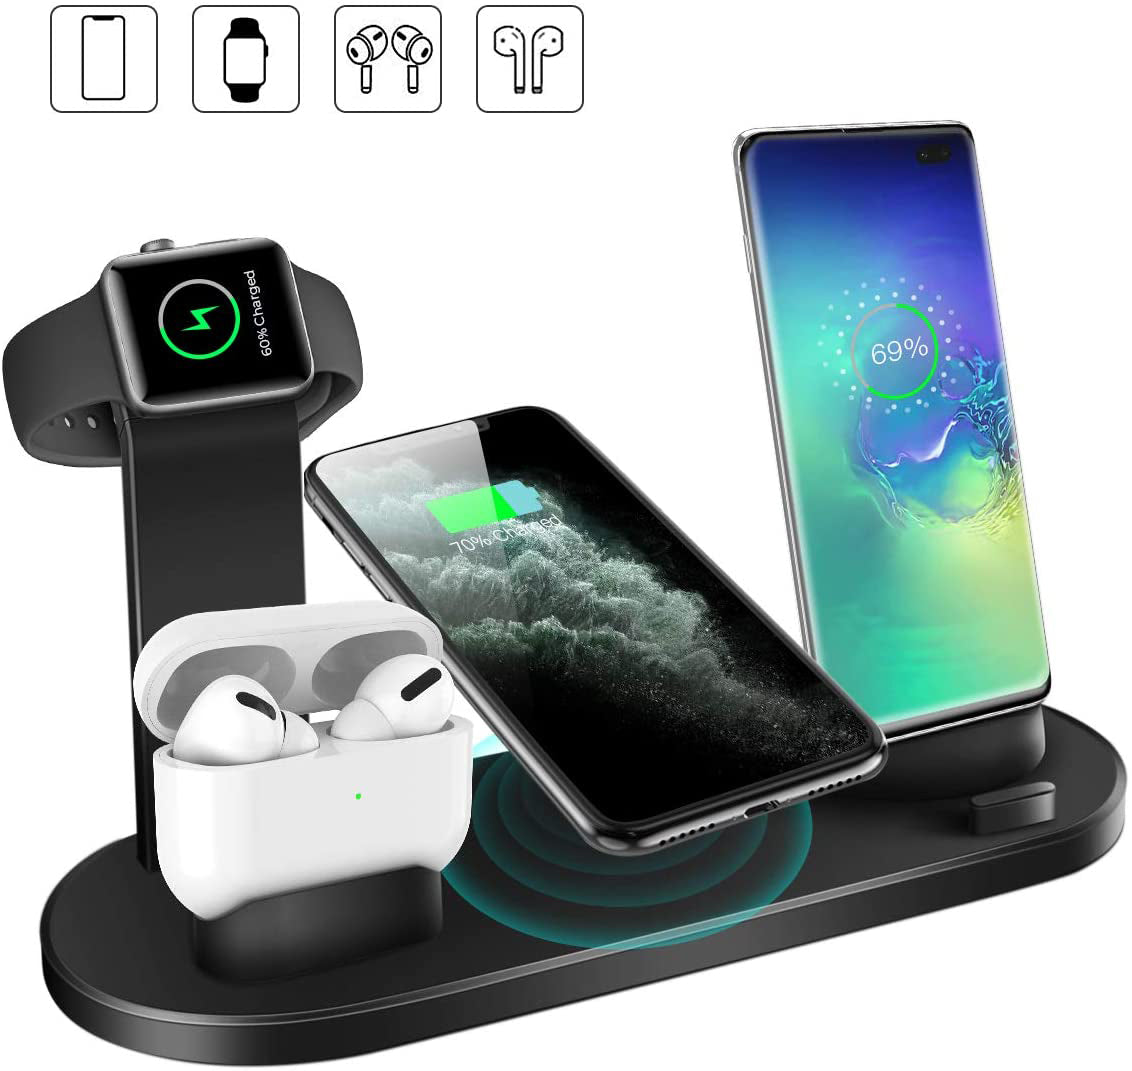 Wireless phone charger - The Tech Heaven